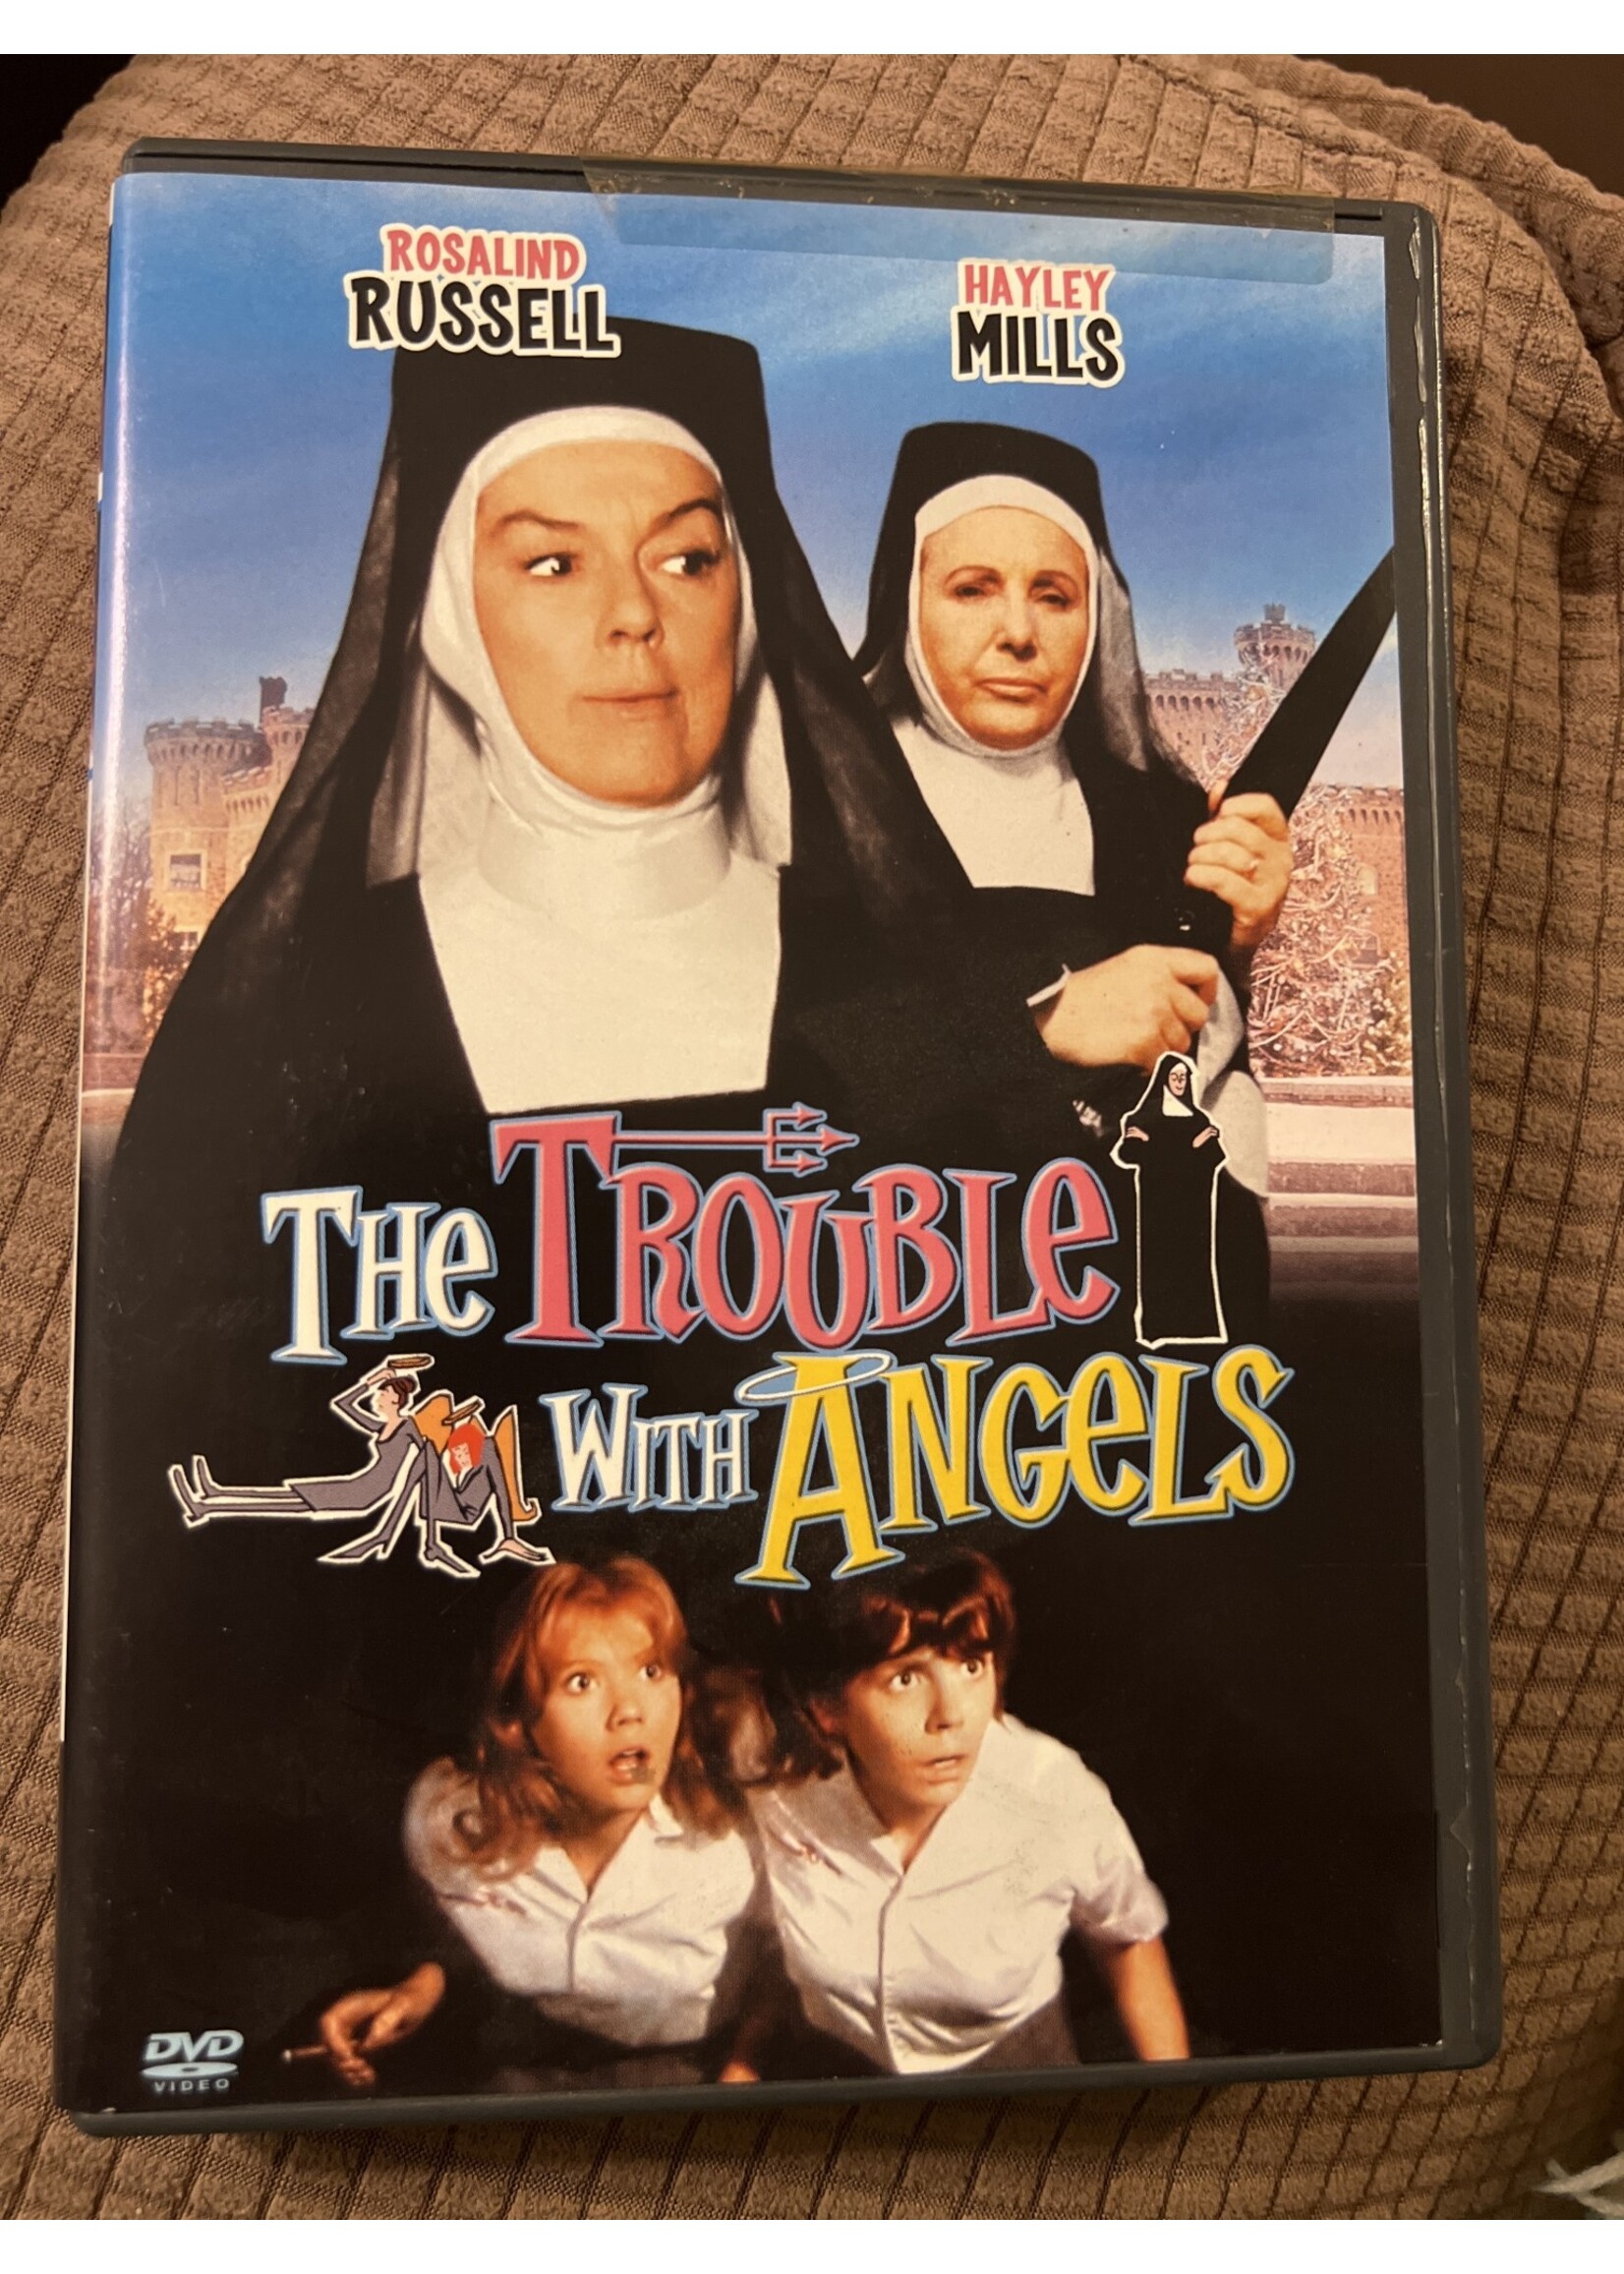 The Trouble With Angels DVD